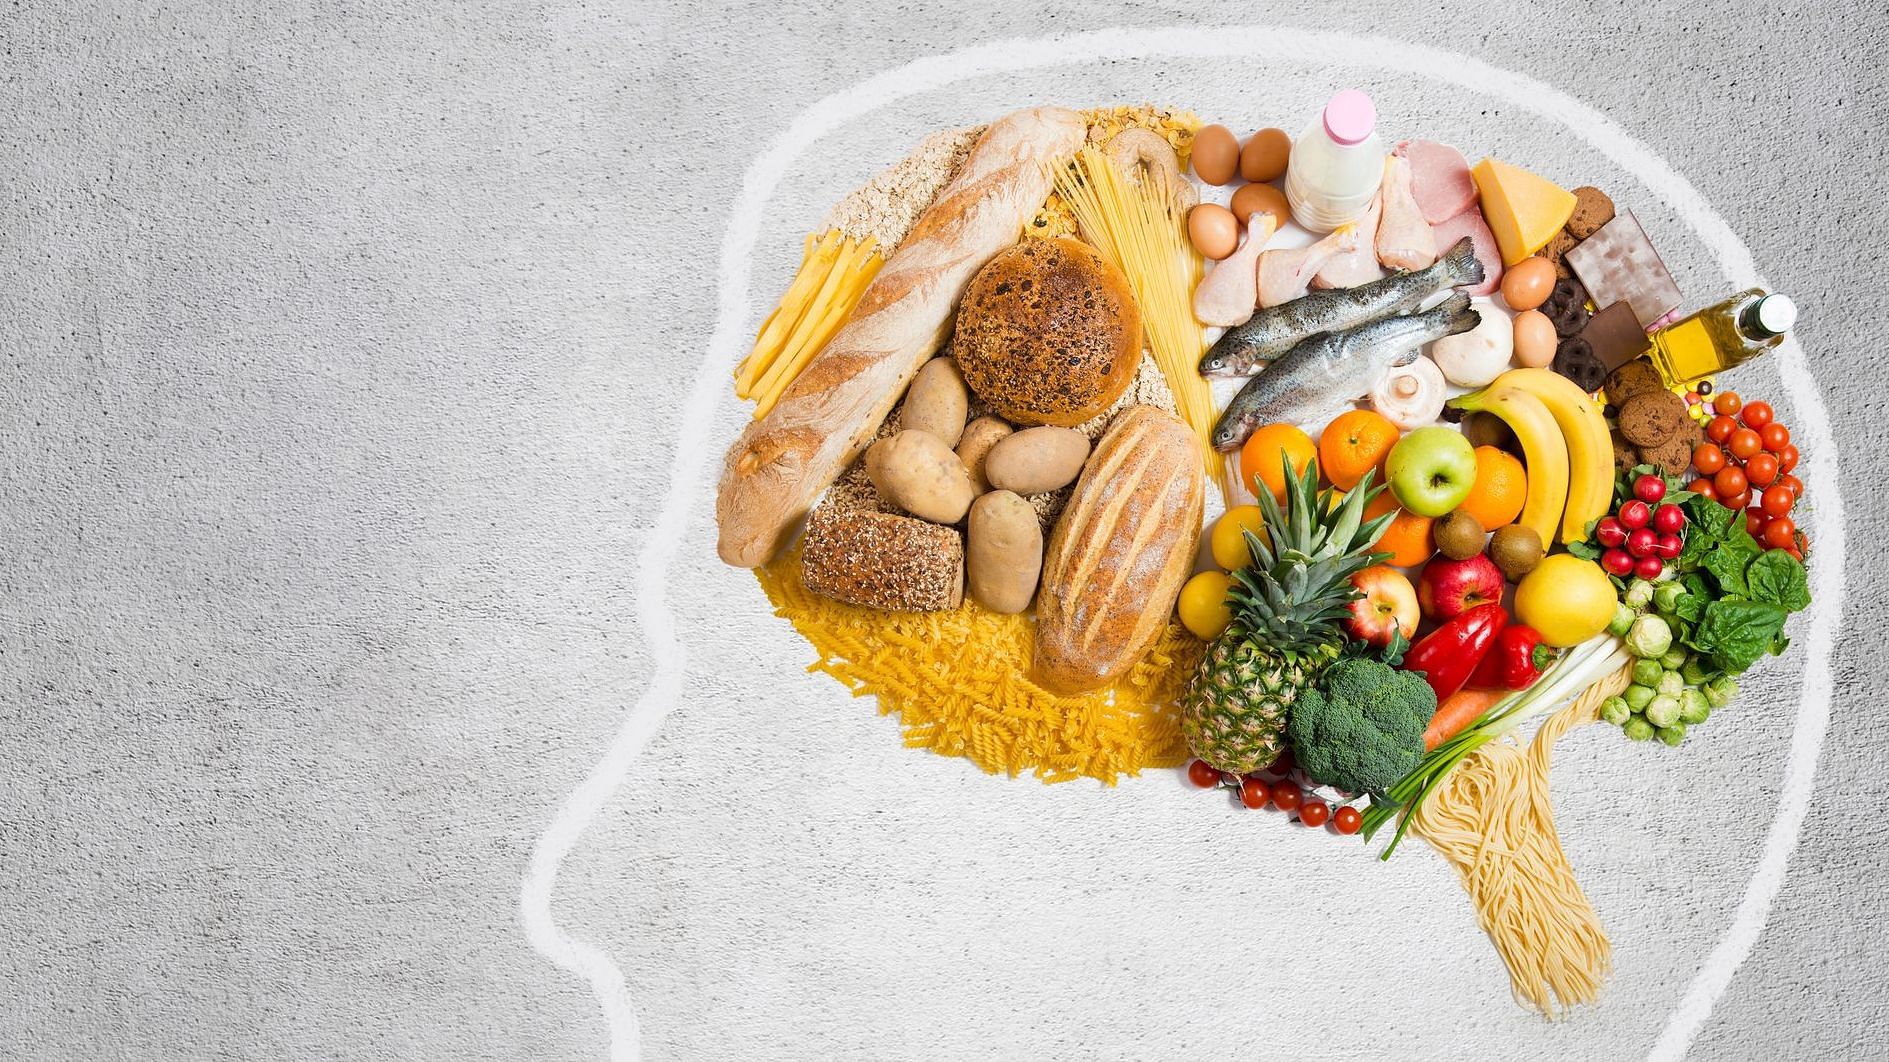 World Mental Health Day 2019: Our brains’ health  depends on what we plate, and what we eat (and what we skip) 